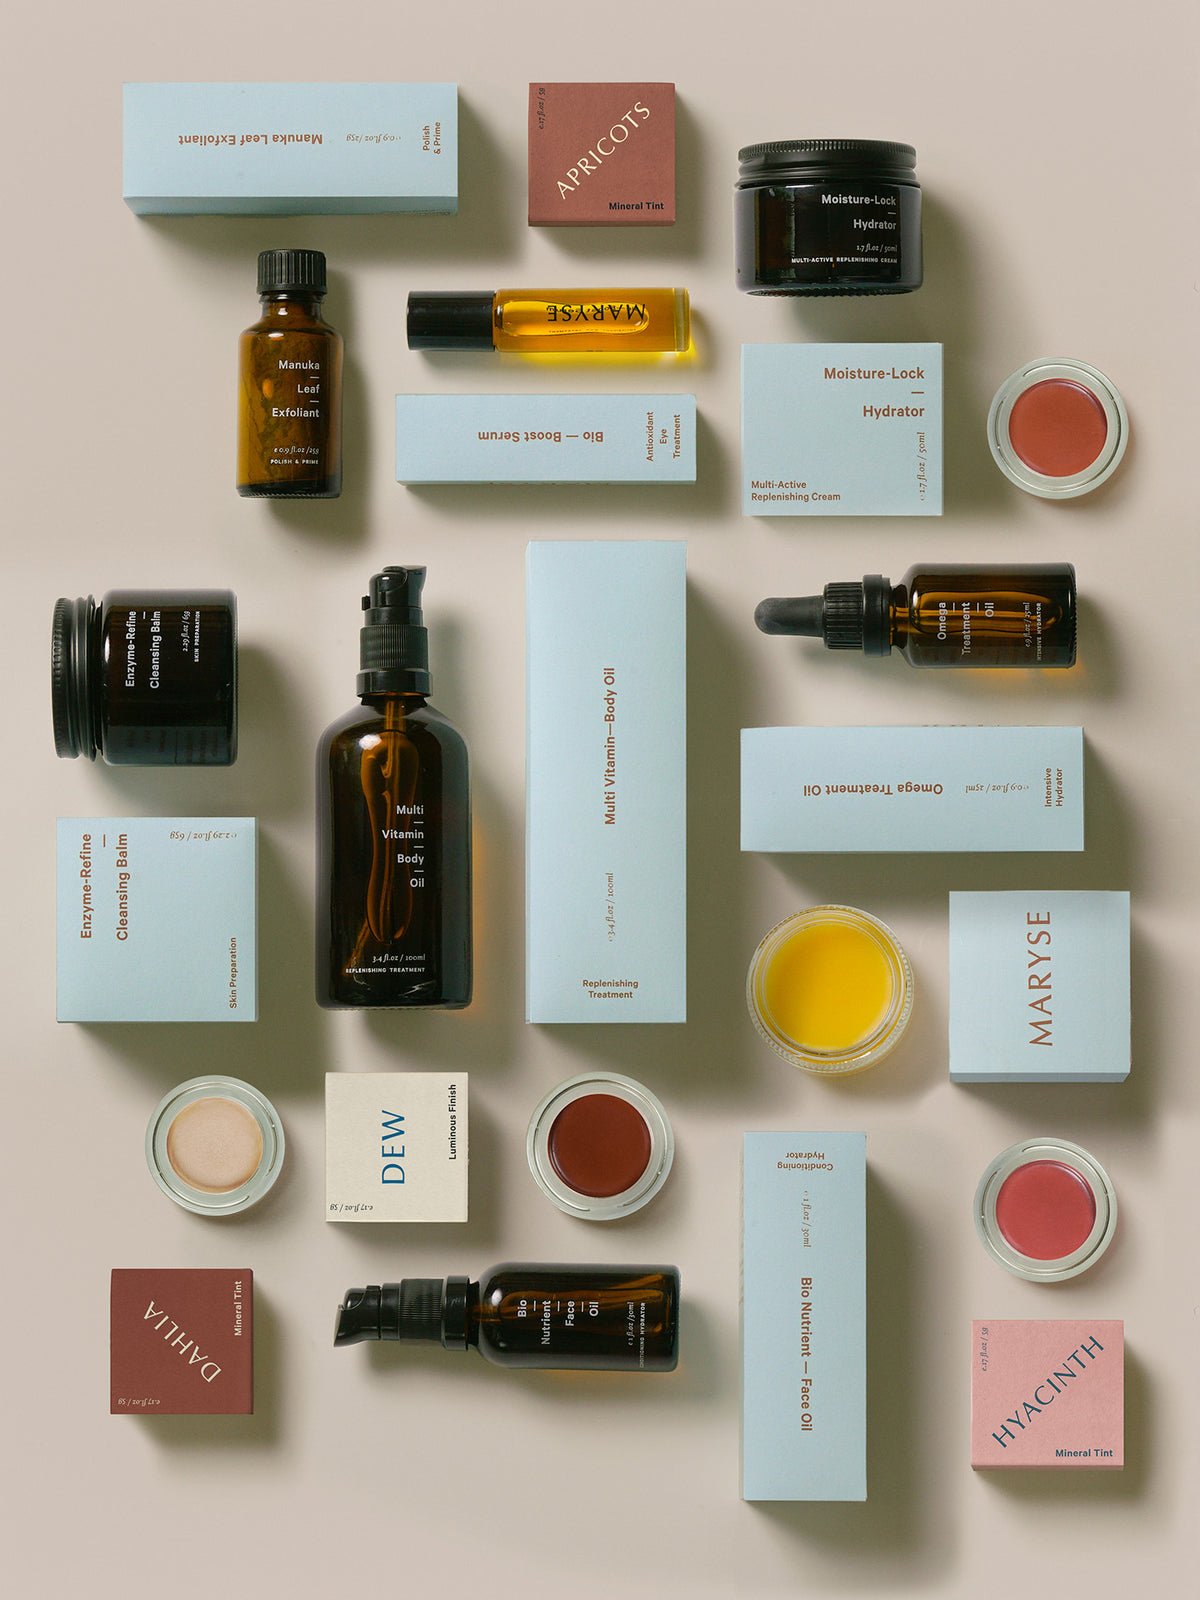 A collection of MARYSE Bio Nutrient – Face Oil cosmetic products arranged on a white surface.